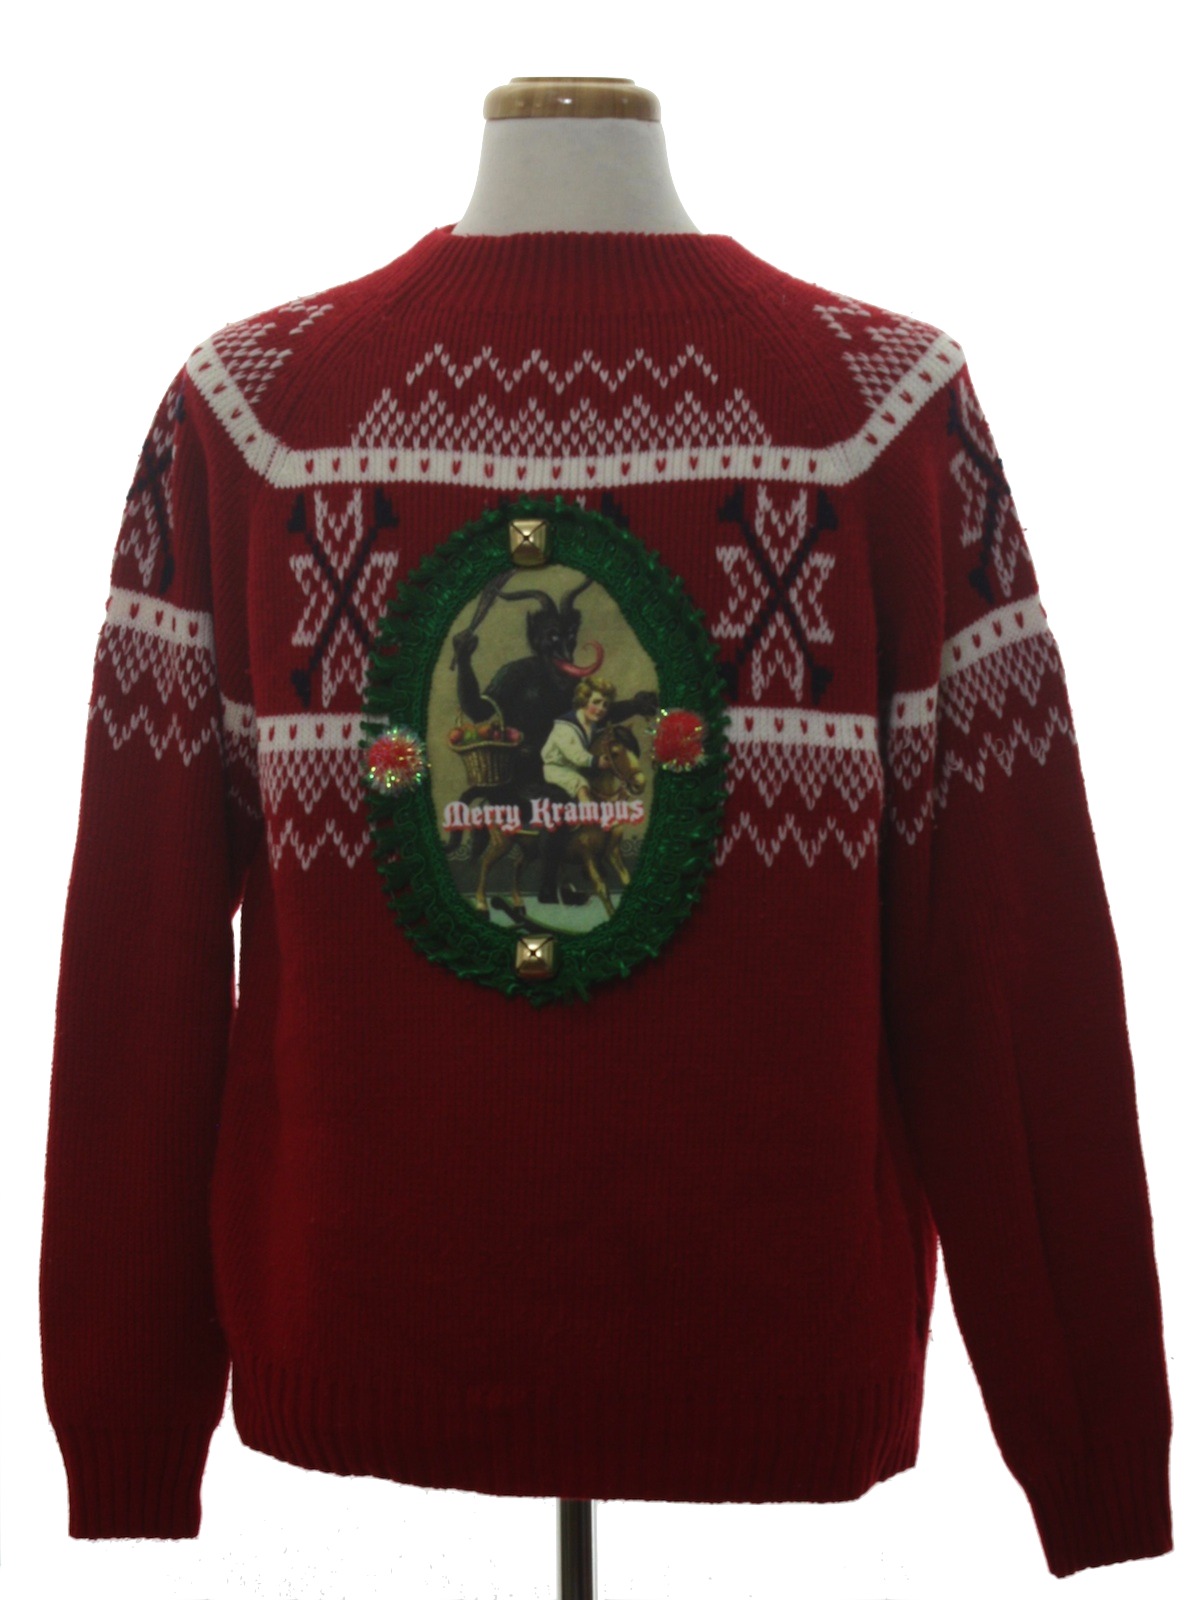 jc penney unisex krampus ugly christmas sweater 80s style jc penney ...